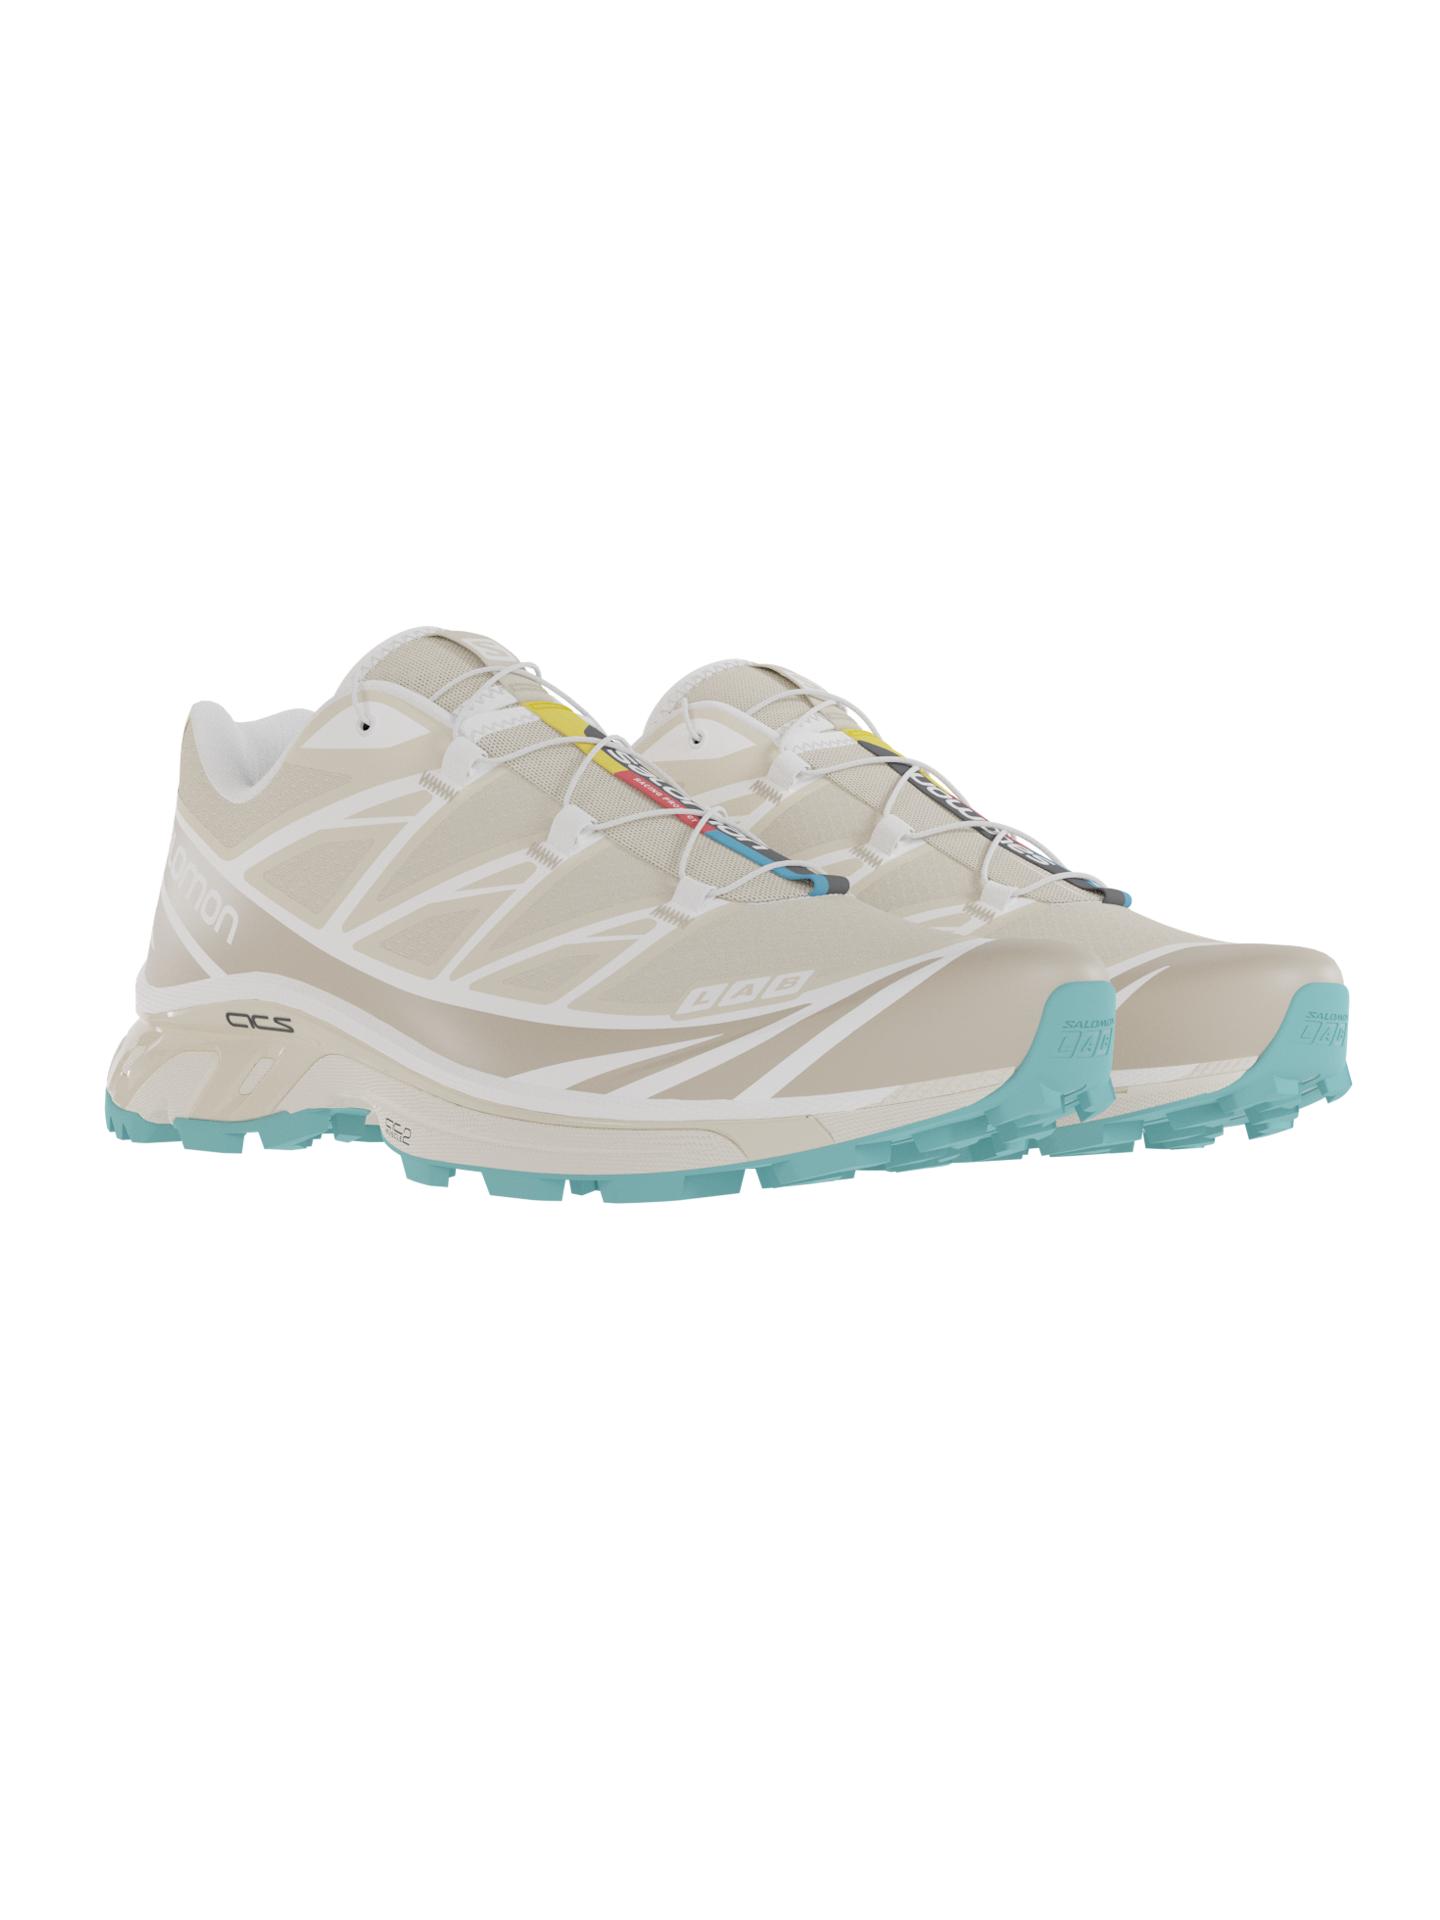 Salomon XT6 / 10 years Bleached Sand/White/Meadowbrook by SALOMON